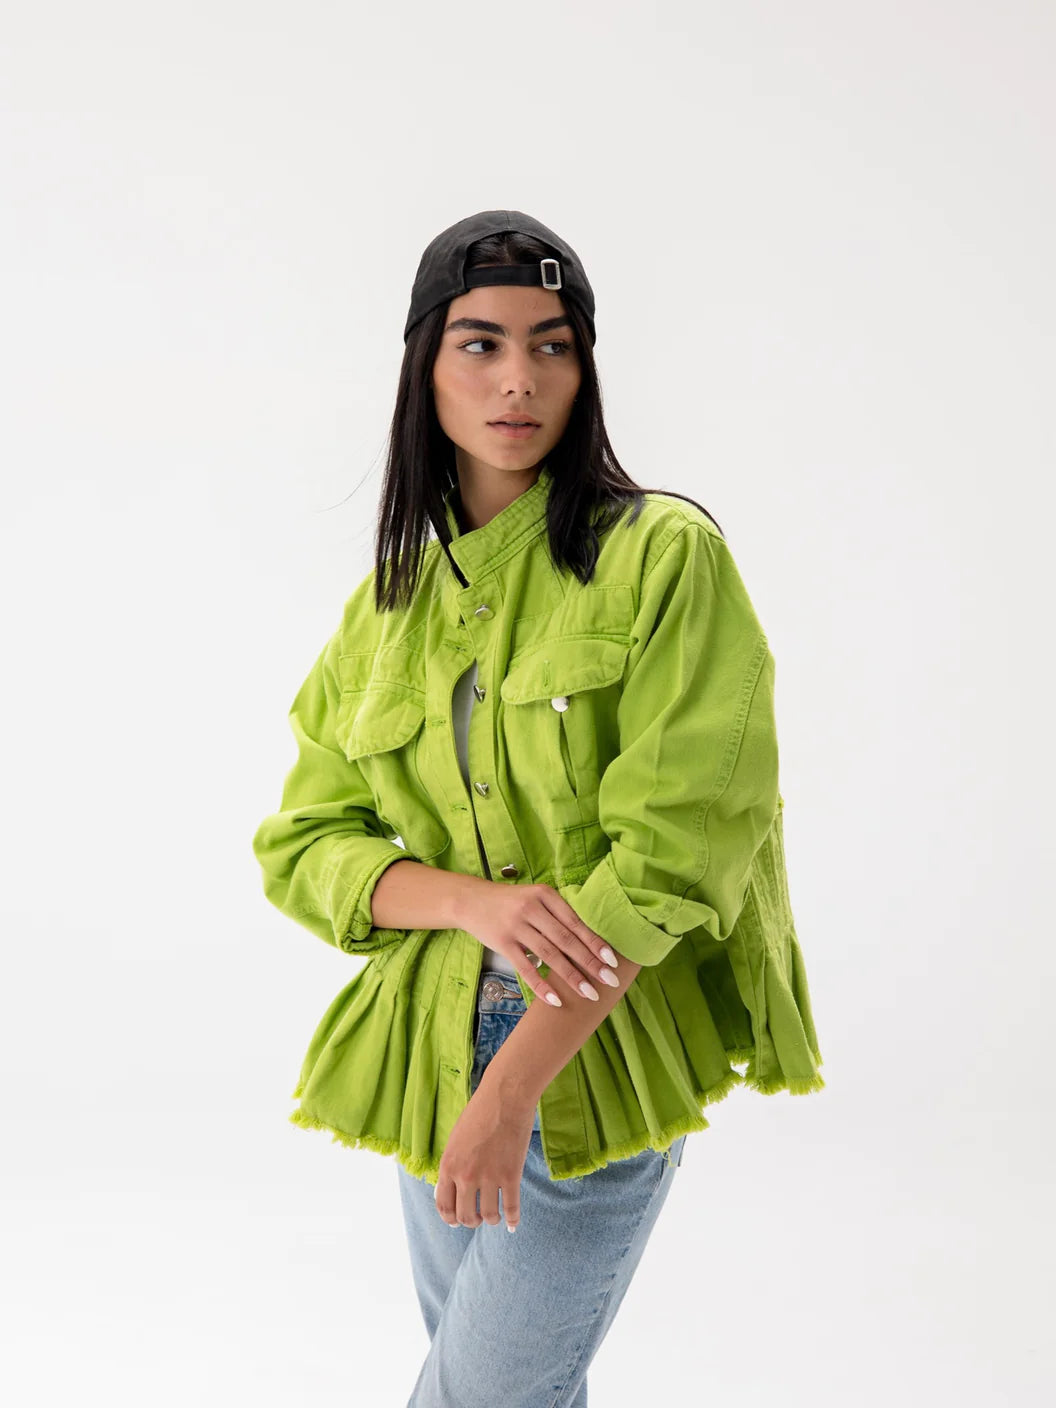 The pleated denim jacket in apple green